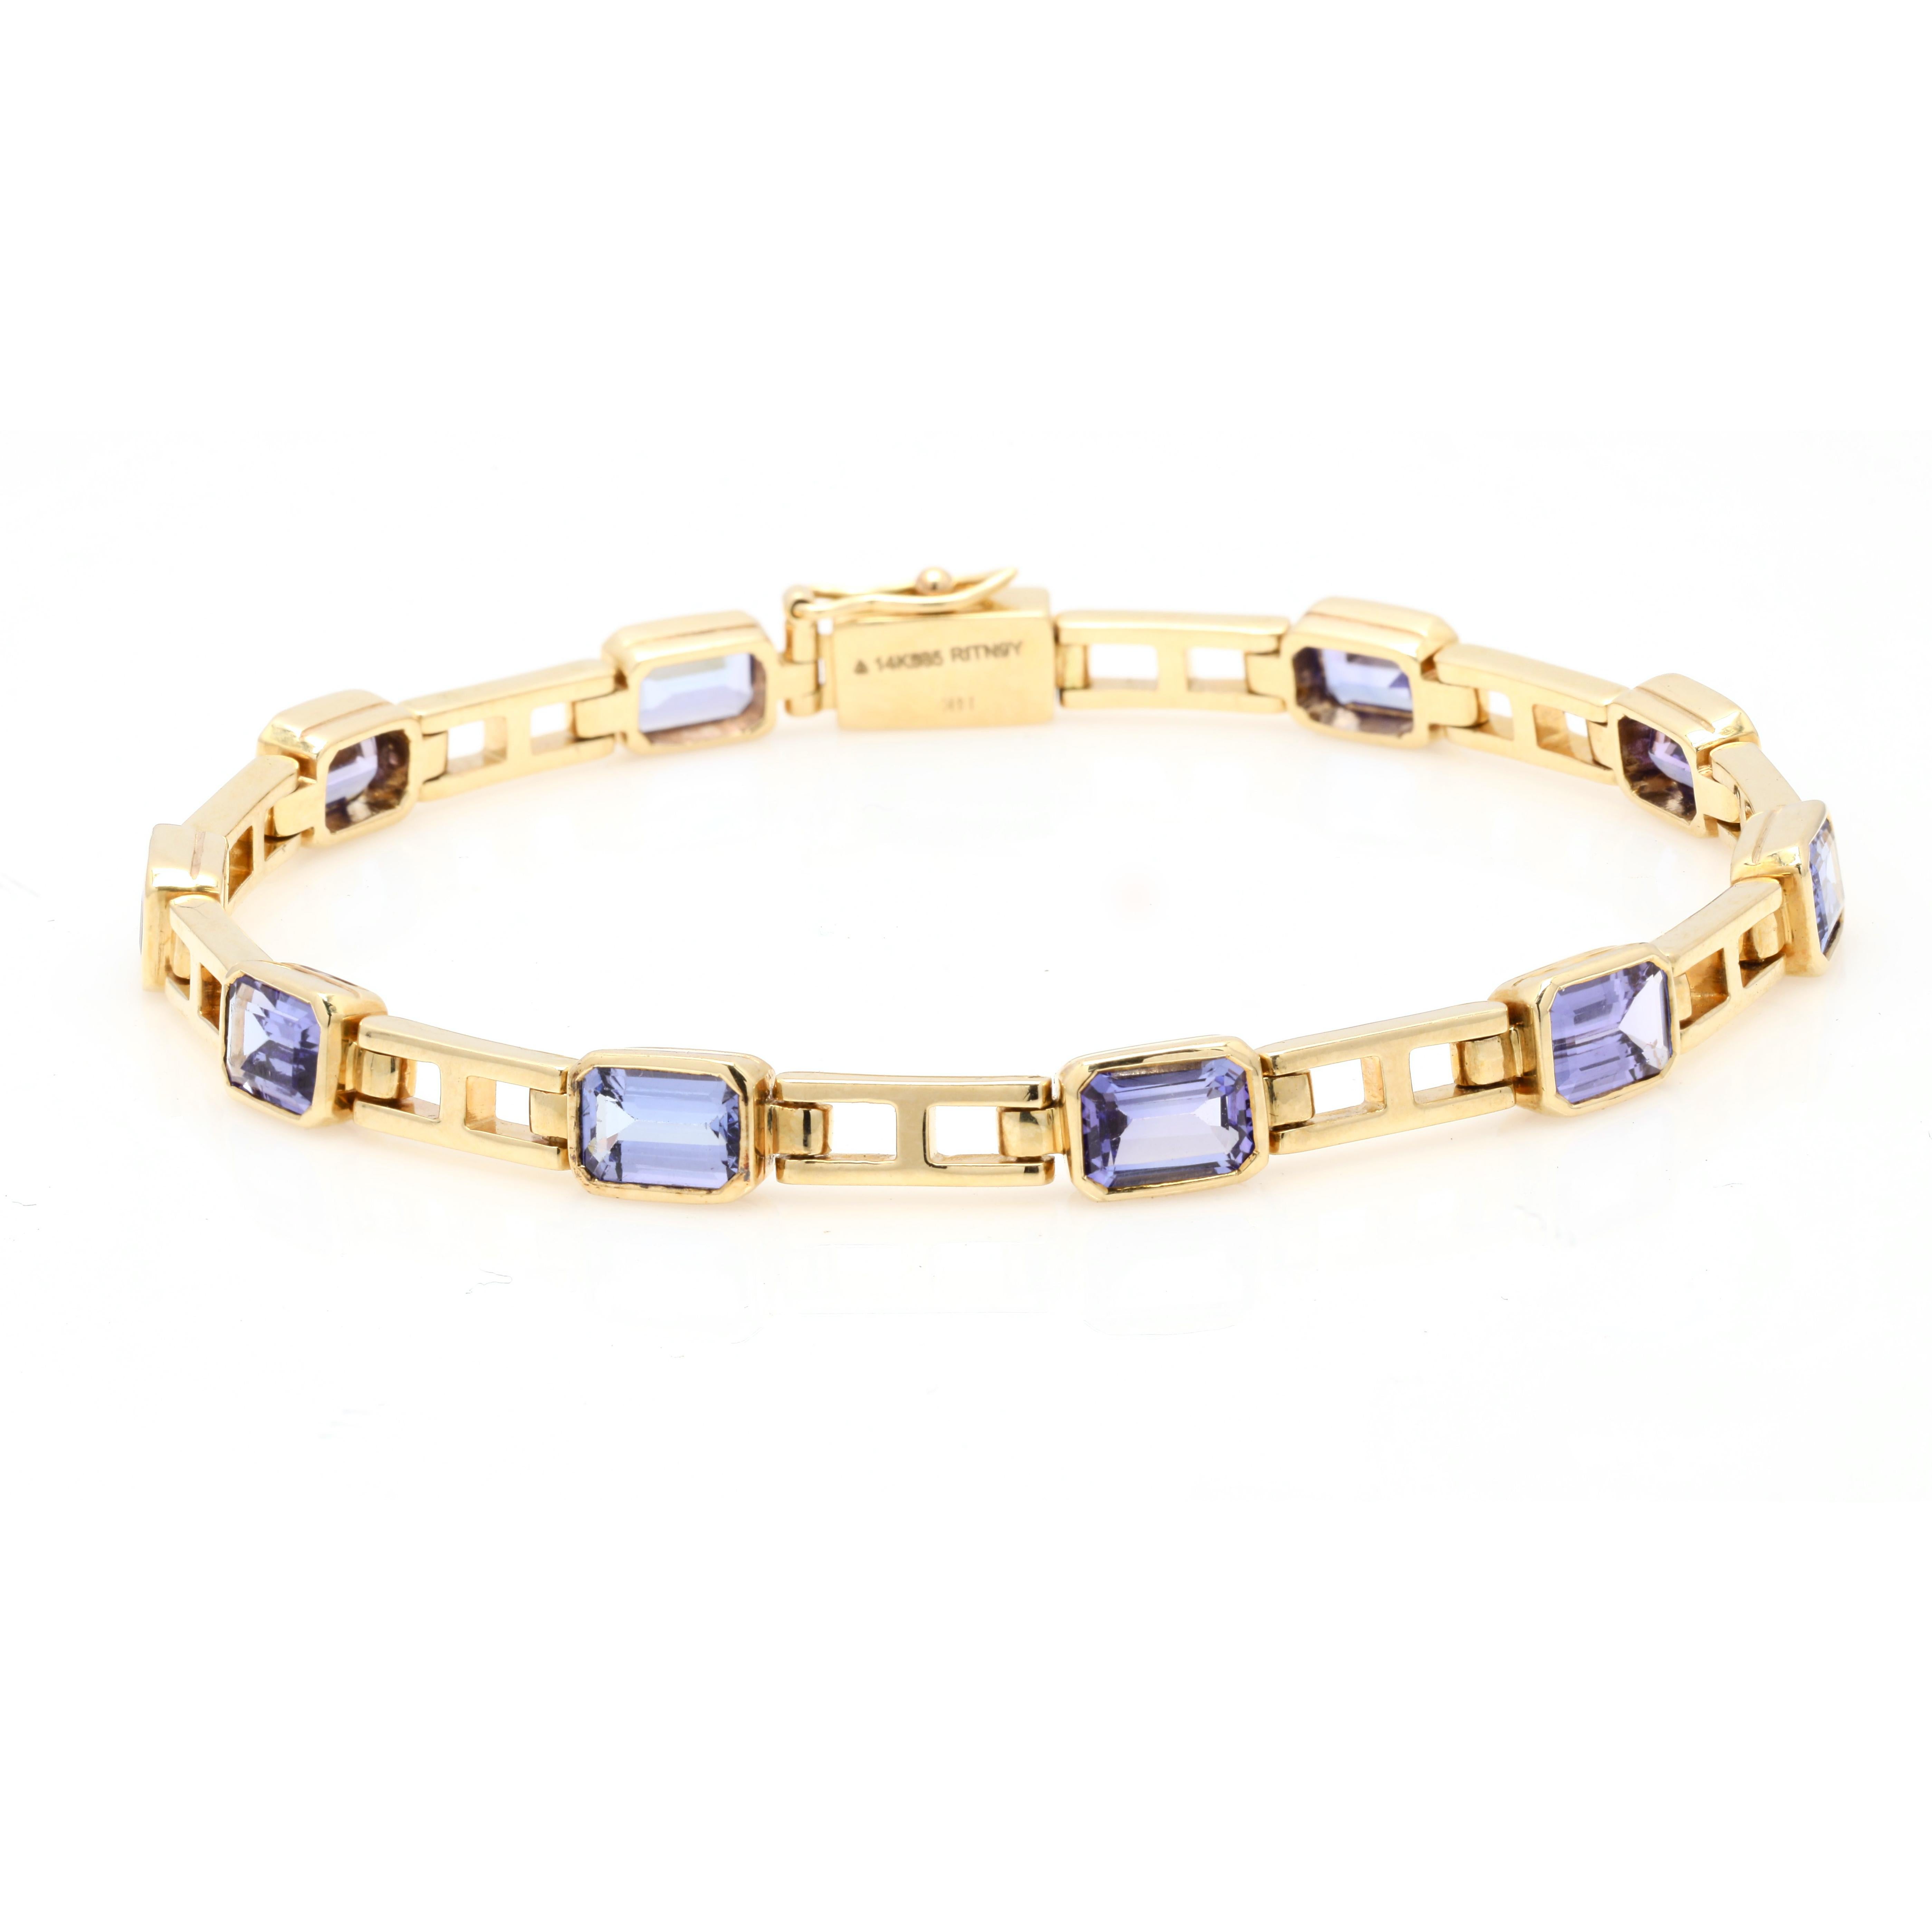 Tanzanite tennis bracelet made in 14K gold. It has a perfect octagon cut gemstone to make you stand out on any occasion or an event. 
Tanzanite facilitates higher concentration.
Featuring 6.82 cts of tanzanite set in solid 14K gold chain style in